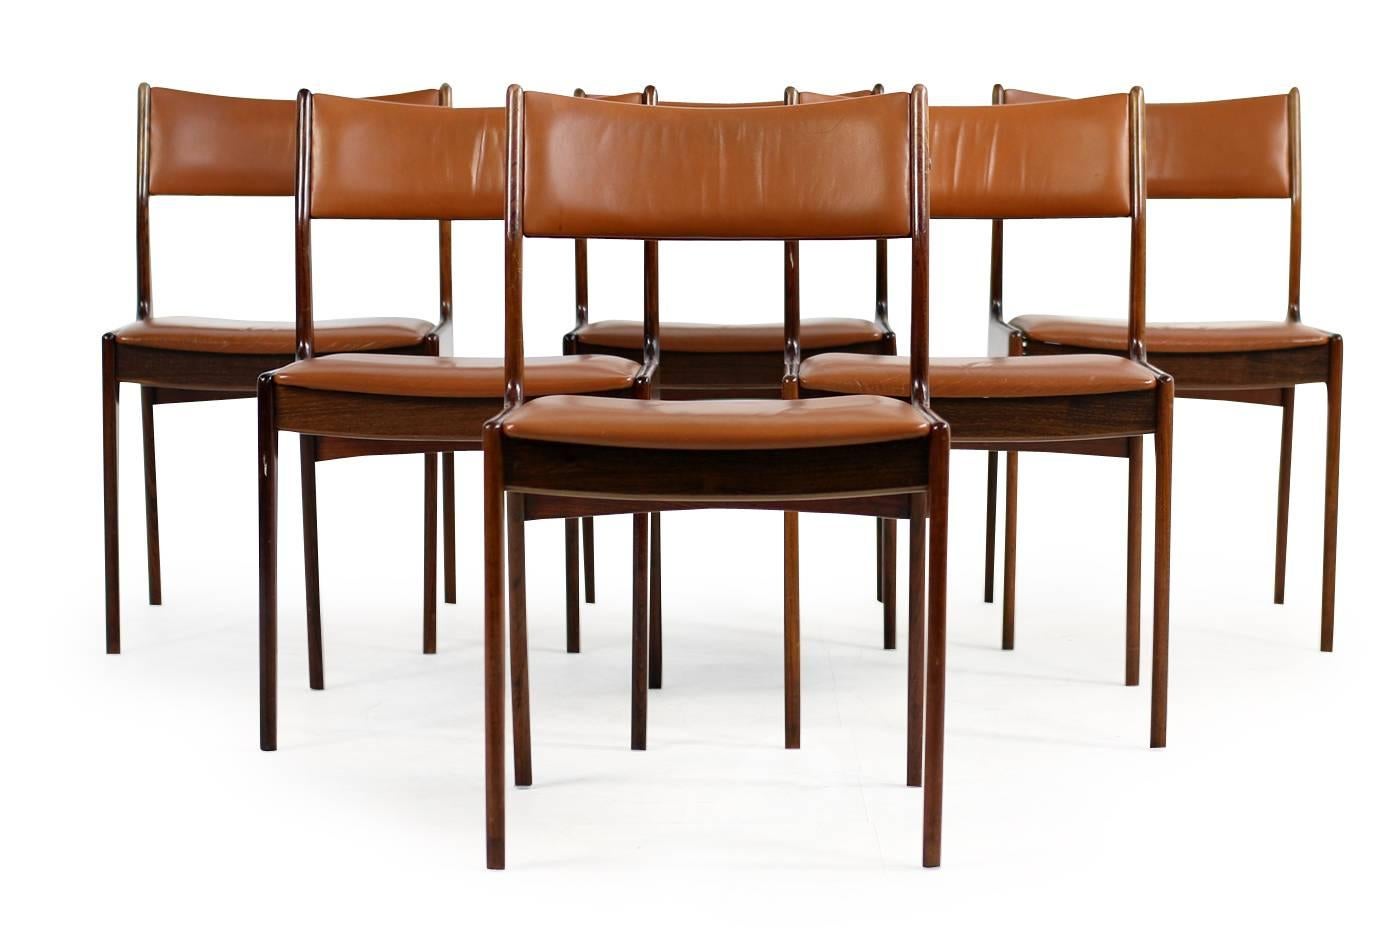 Beautiful set of six Danish modern design dining chairs by Johannes Andersen for Uldum, Denmark. Good vintage condition, fantastic patina on the leather, other dining chairs and matching dining table available, please check our 1stdibs storefront.